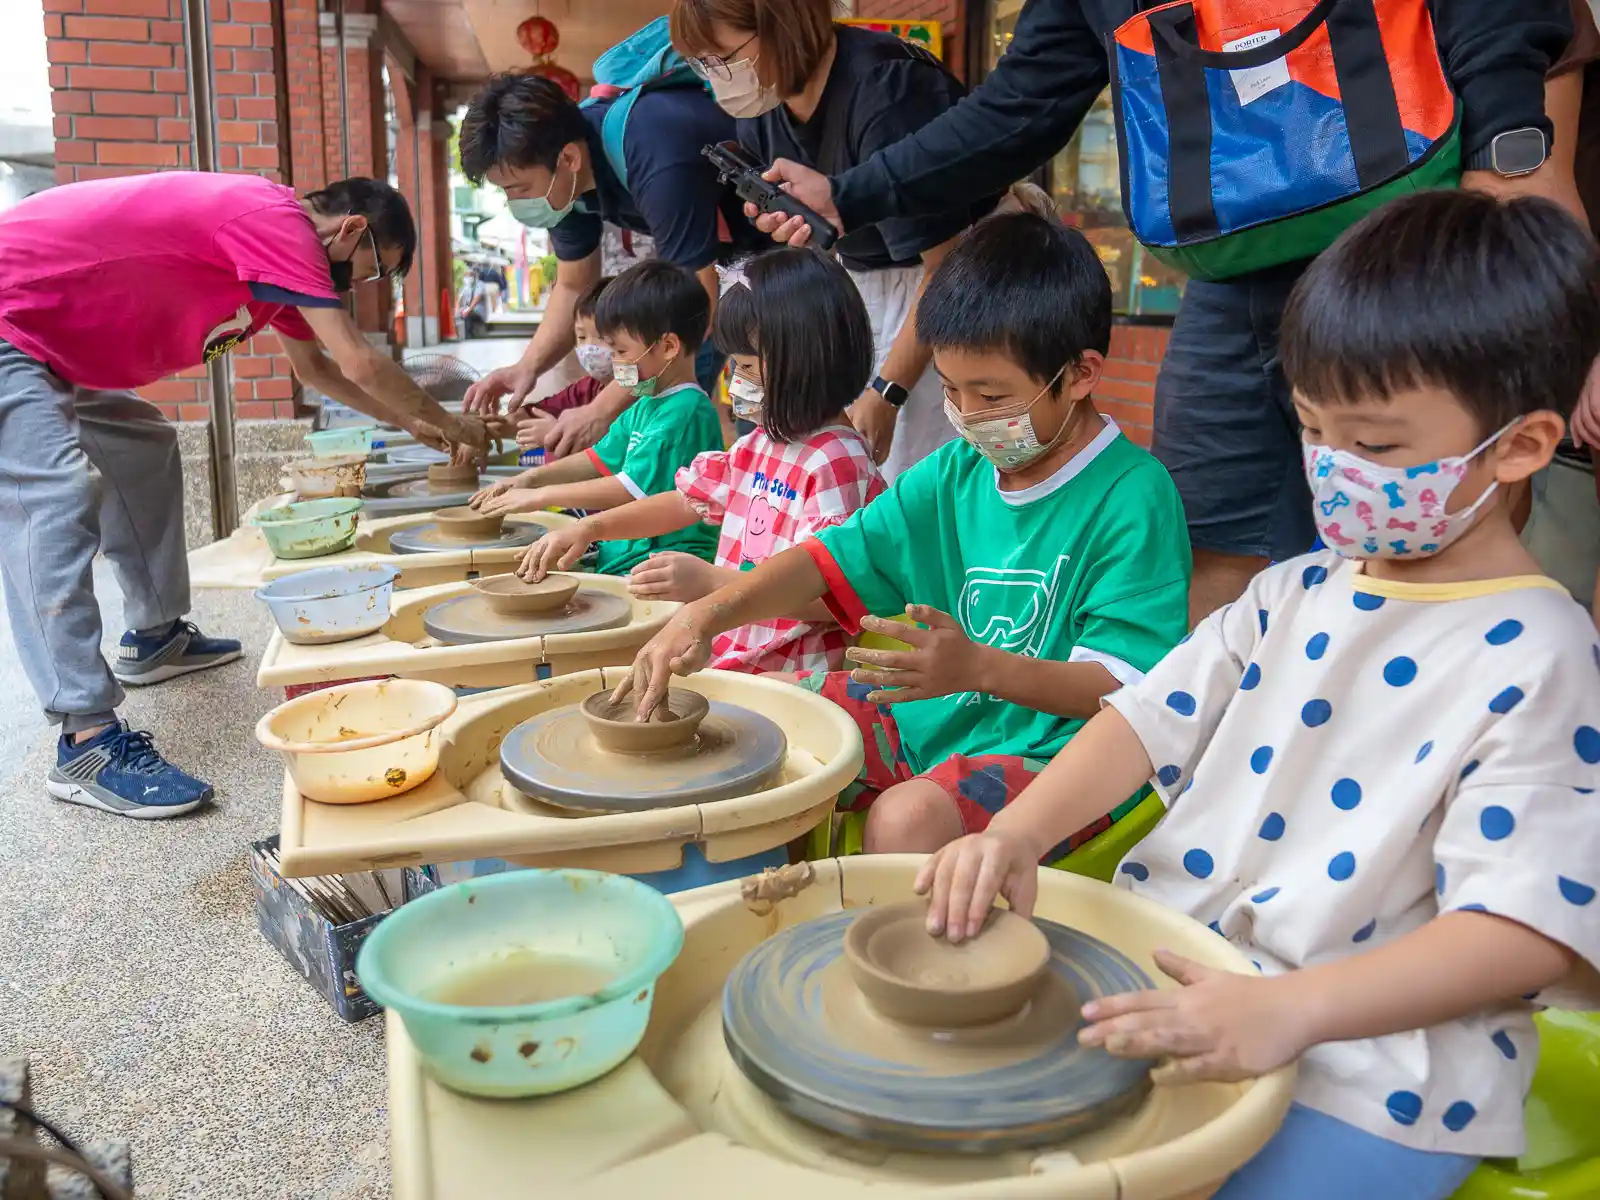 Children are using potter's wheels to shape bowls in a DIY pottery class.